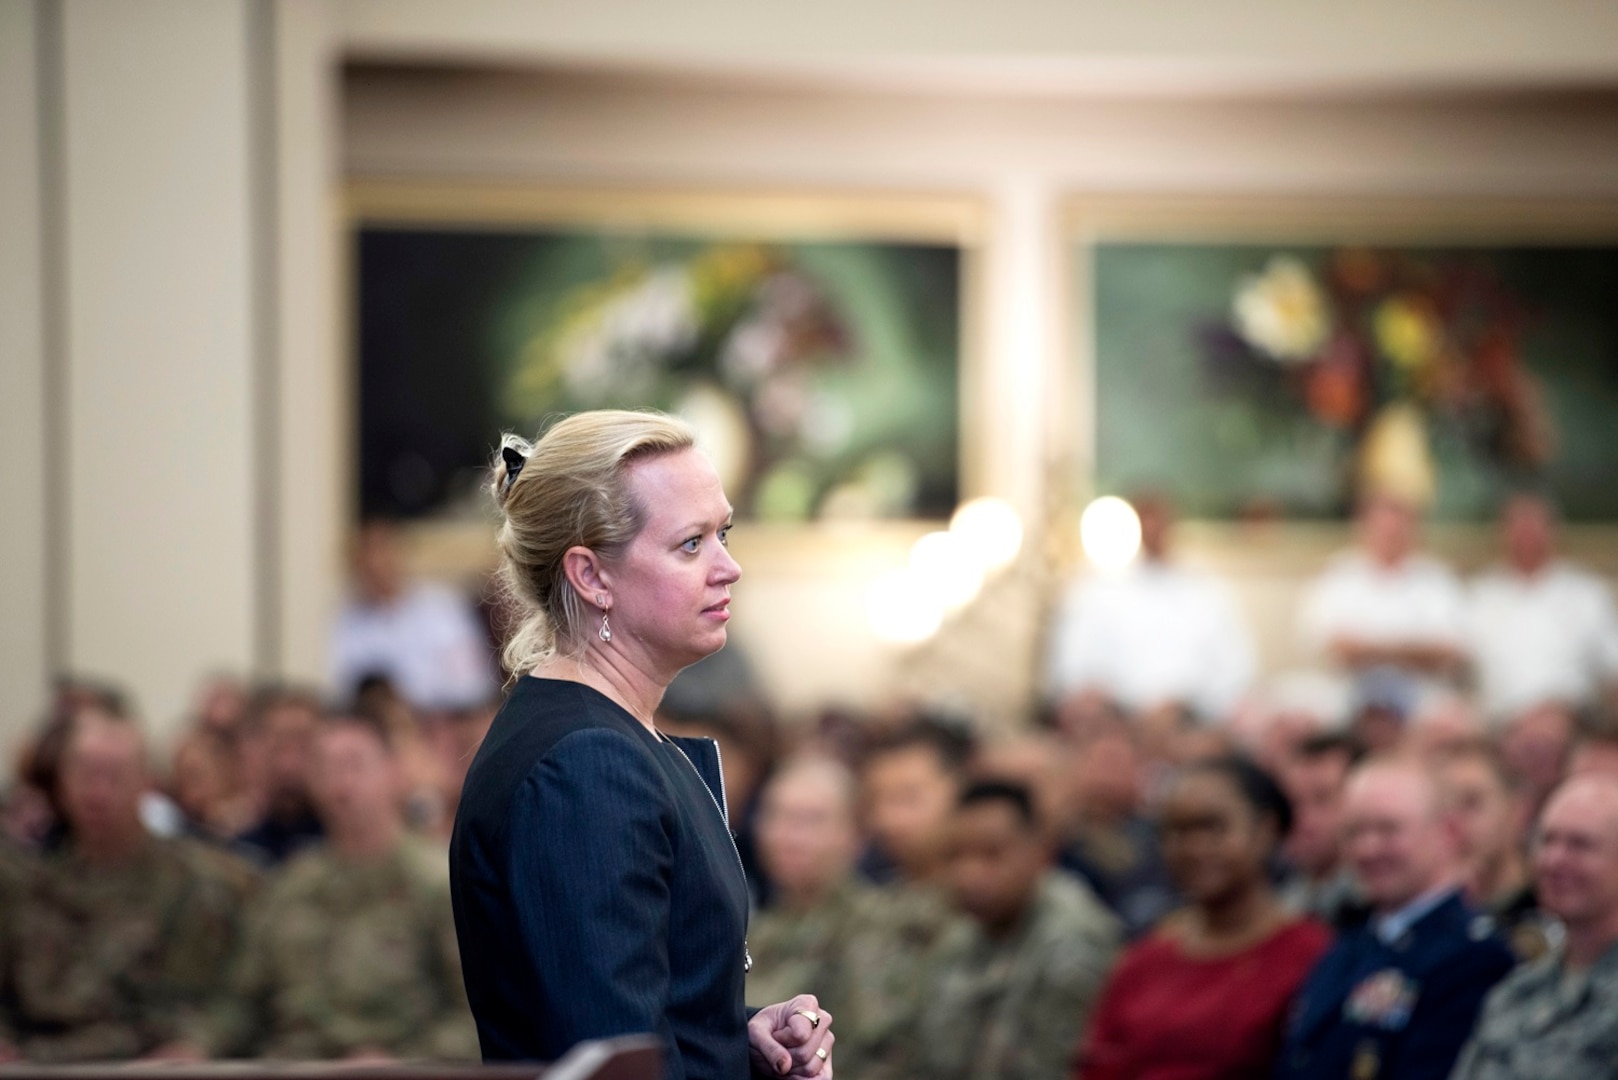 Brenda L. Roesch, 502d Civil Engineer Group director, presents remarks during the group activation ceremony, Oct. 25, 2018, at Joint Base San Antonio-Lackland, Texas.